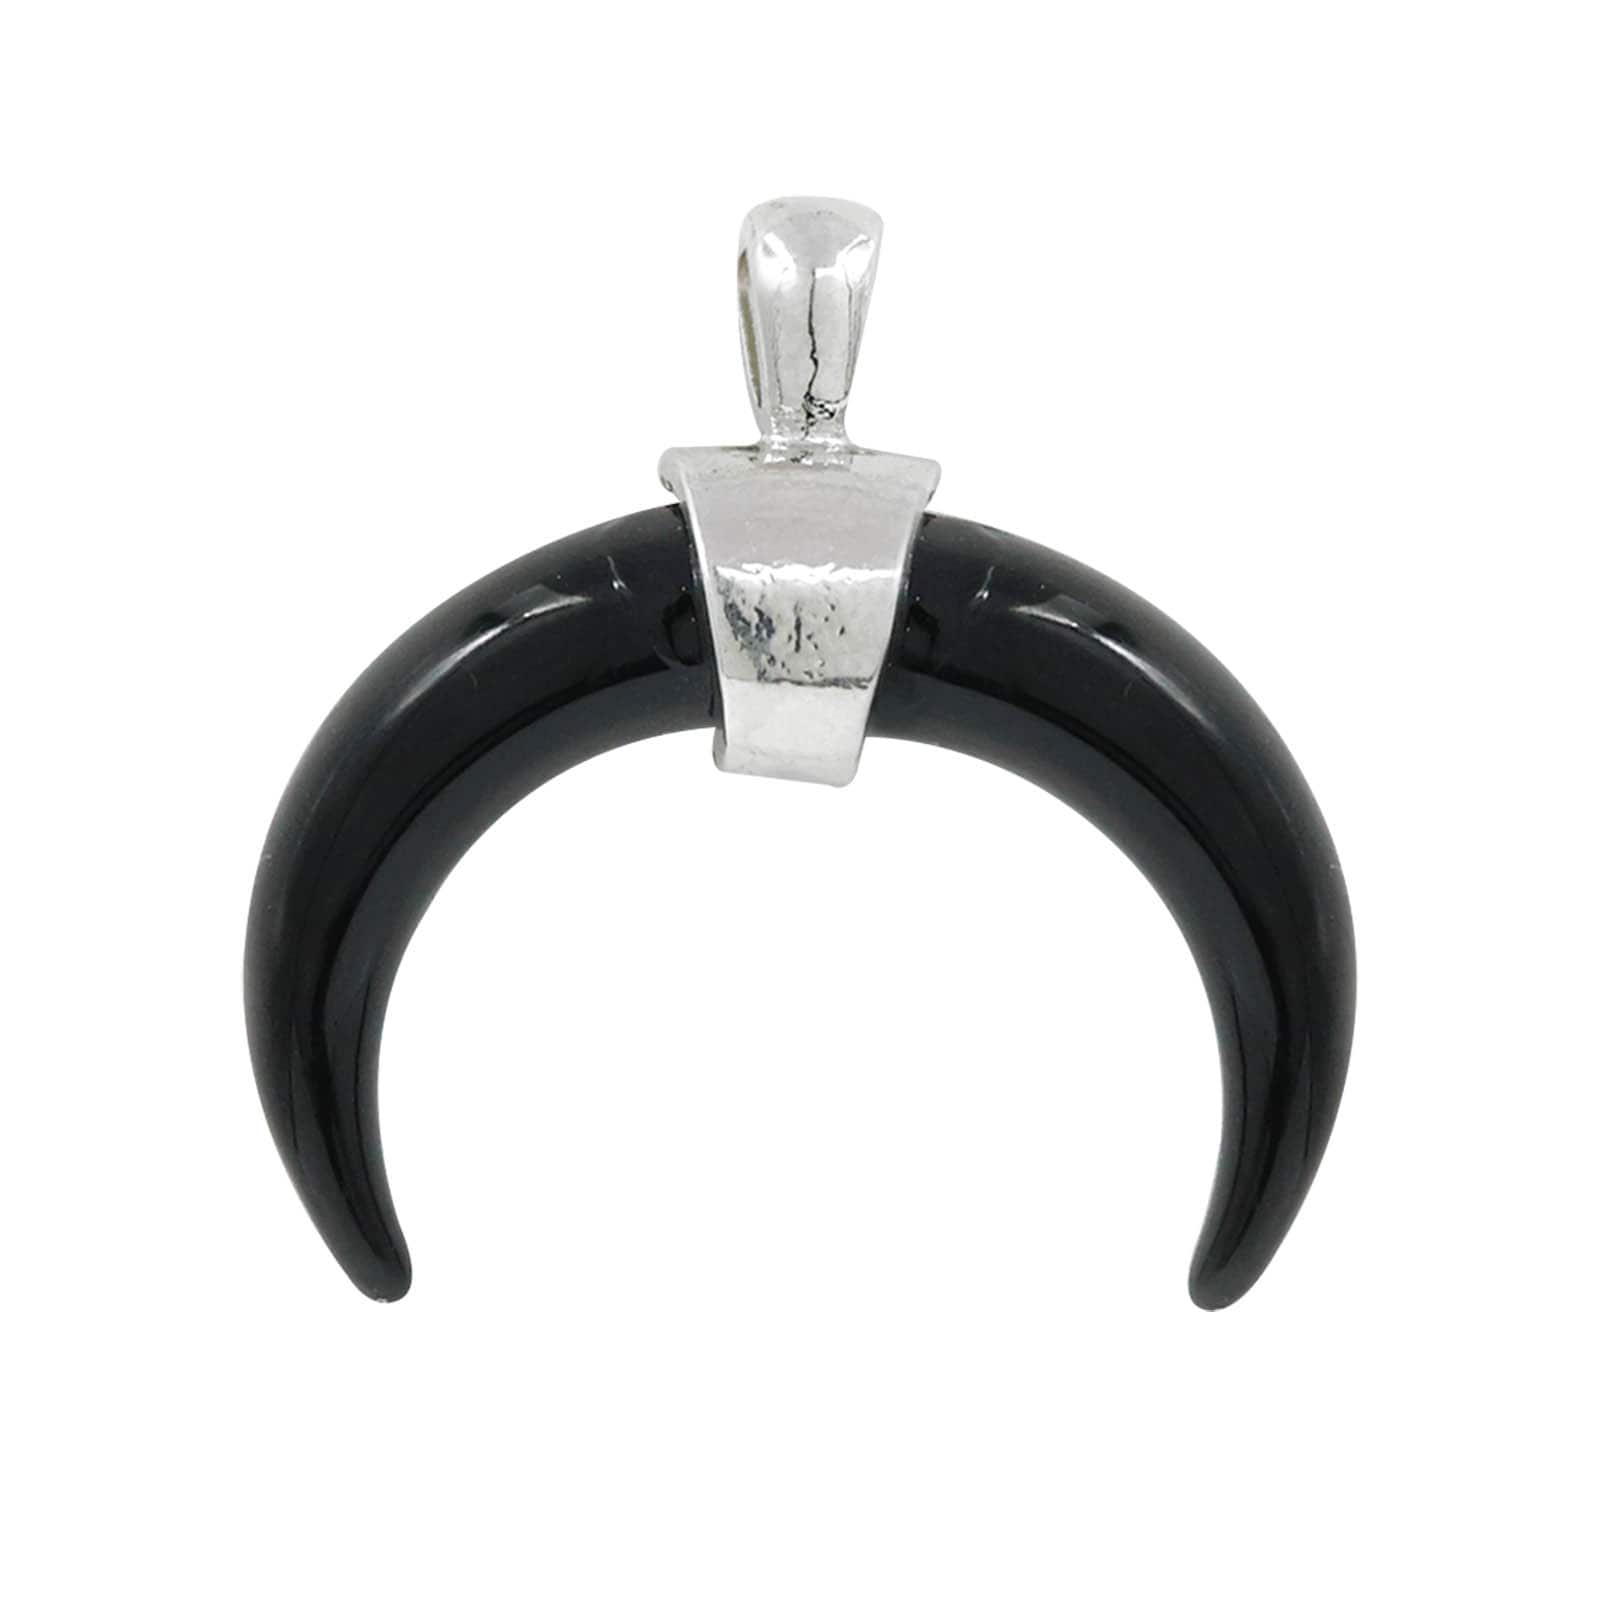 Black Curved Horn Pendant by Bead Landing&#x2122;